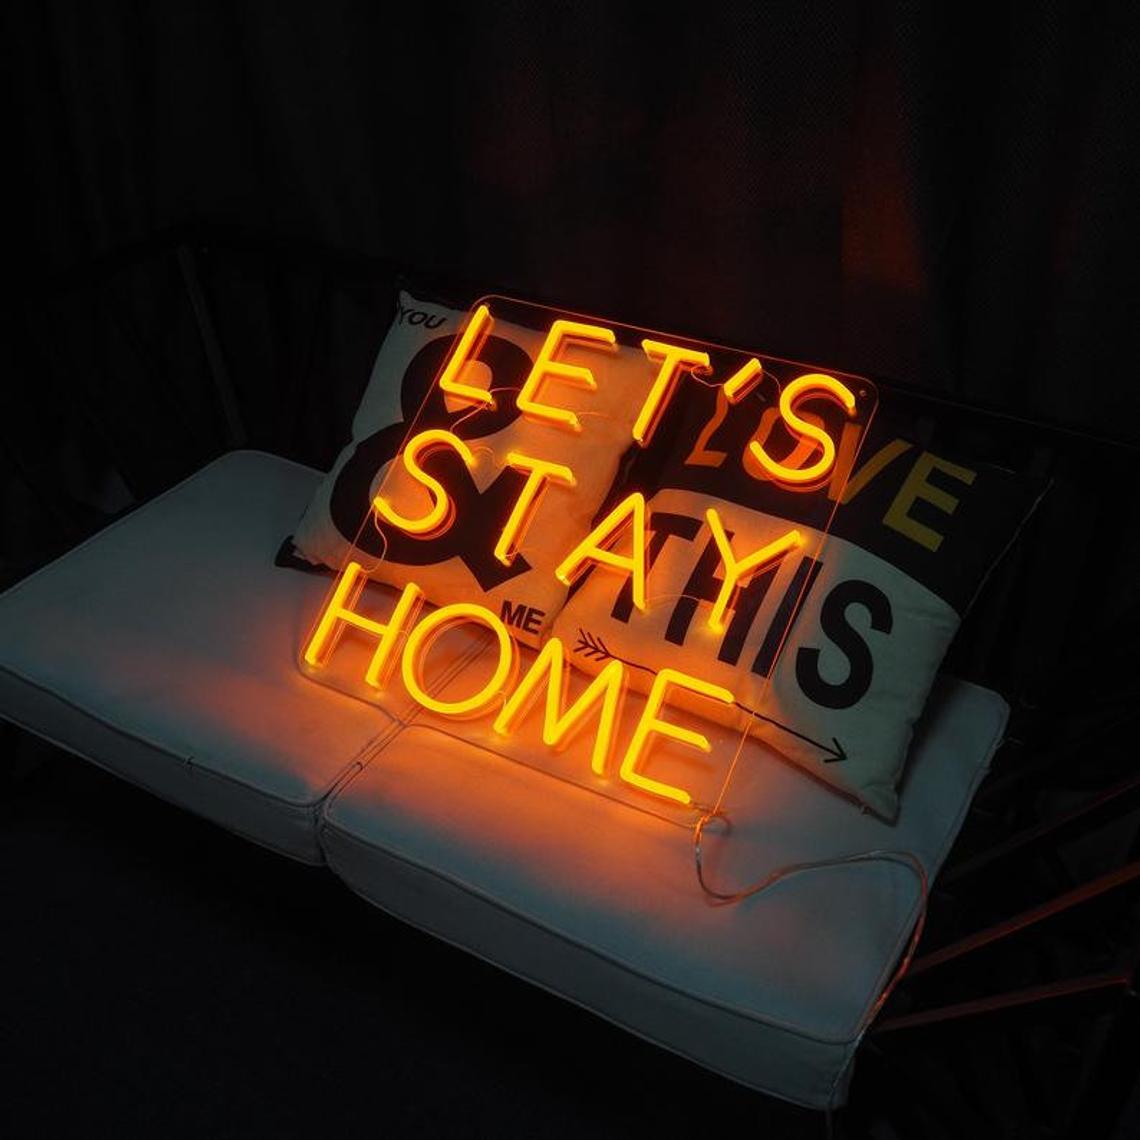 Personalized Neon Sign Three Lines Text Led Neon Lighting